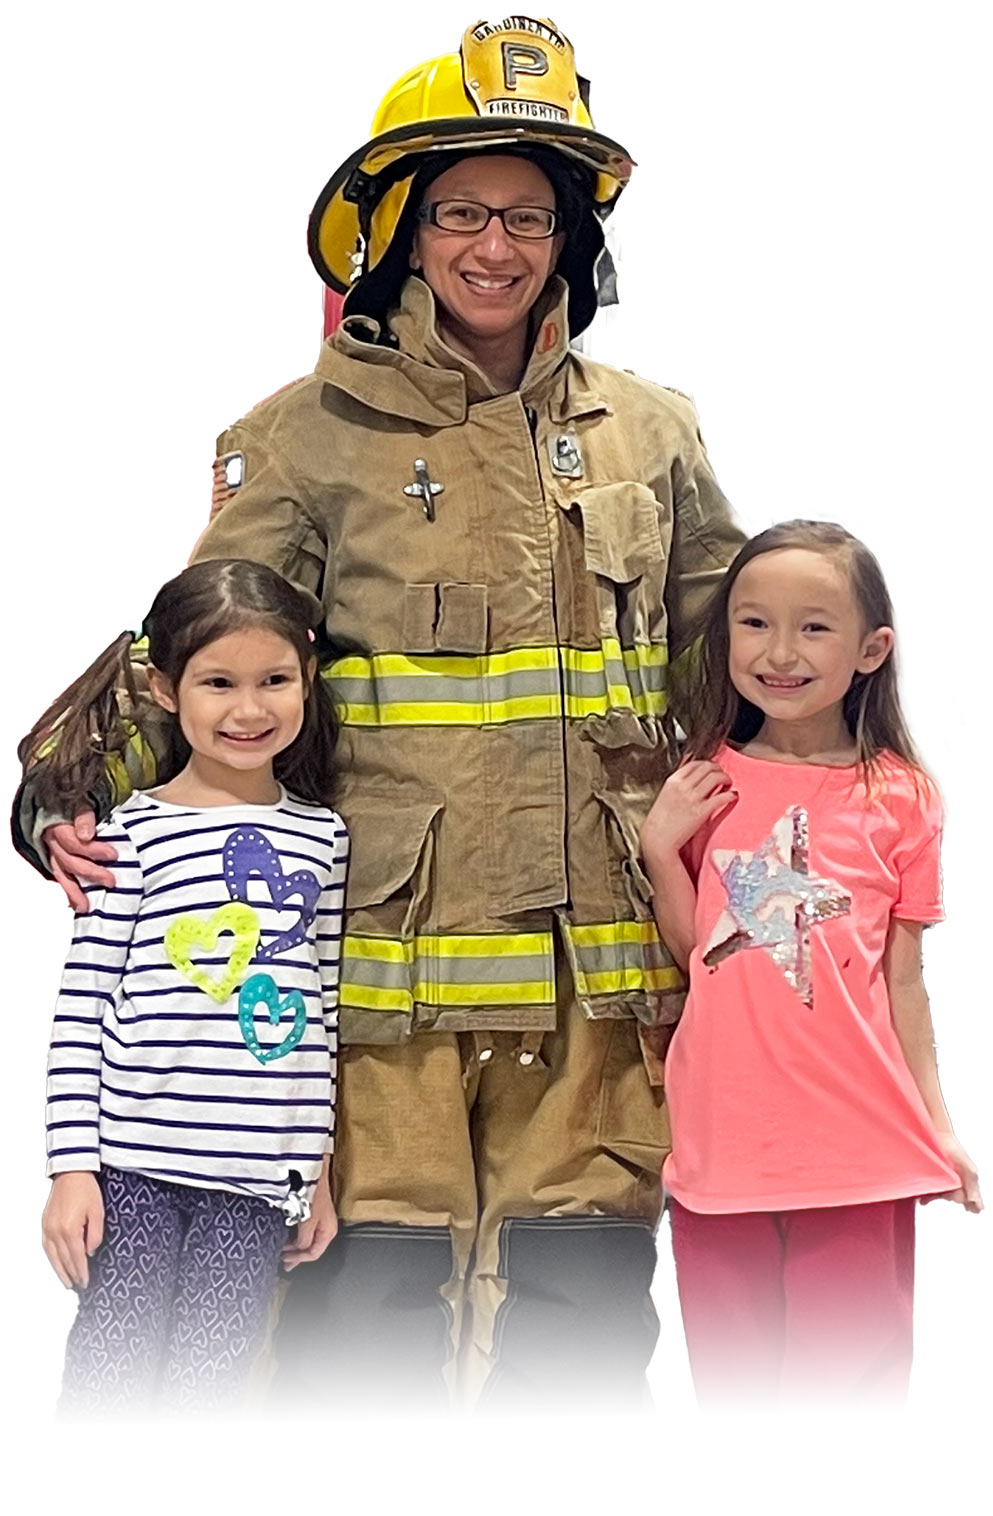 Portrait photograph of Sara Wadsworth (Wallkill Teachers Association) in her firefighter outfit smiling as she poses with two little happy smiling girls next to her